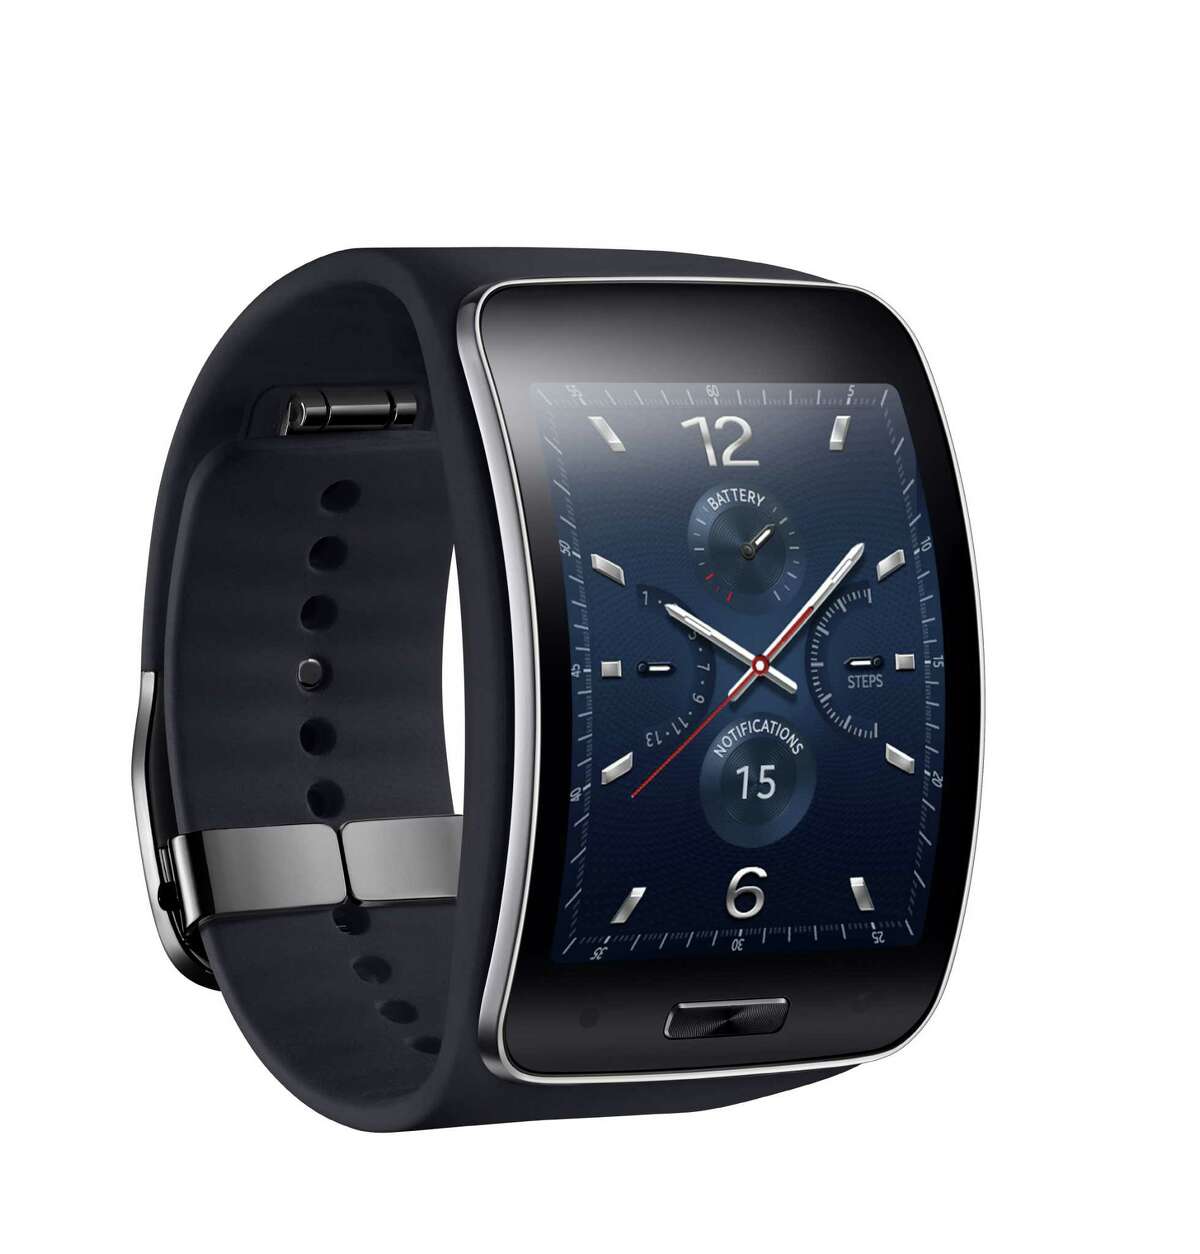 This undated product image provided by Samsung shows the Gear S watch.